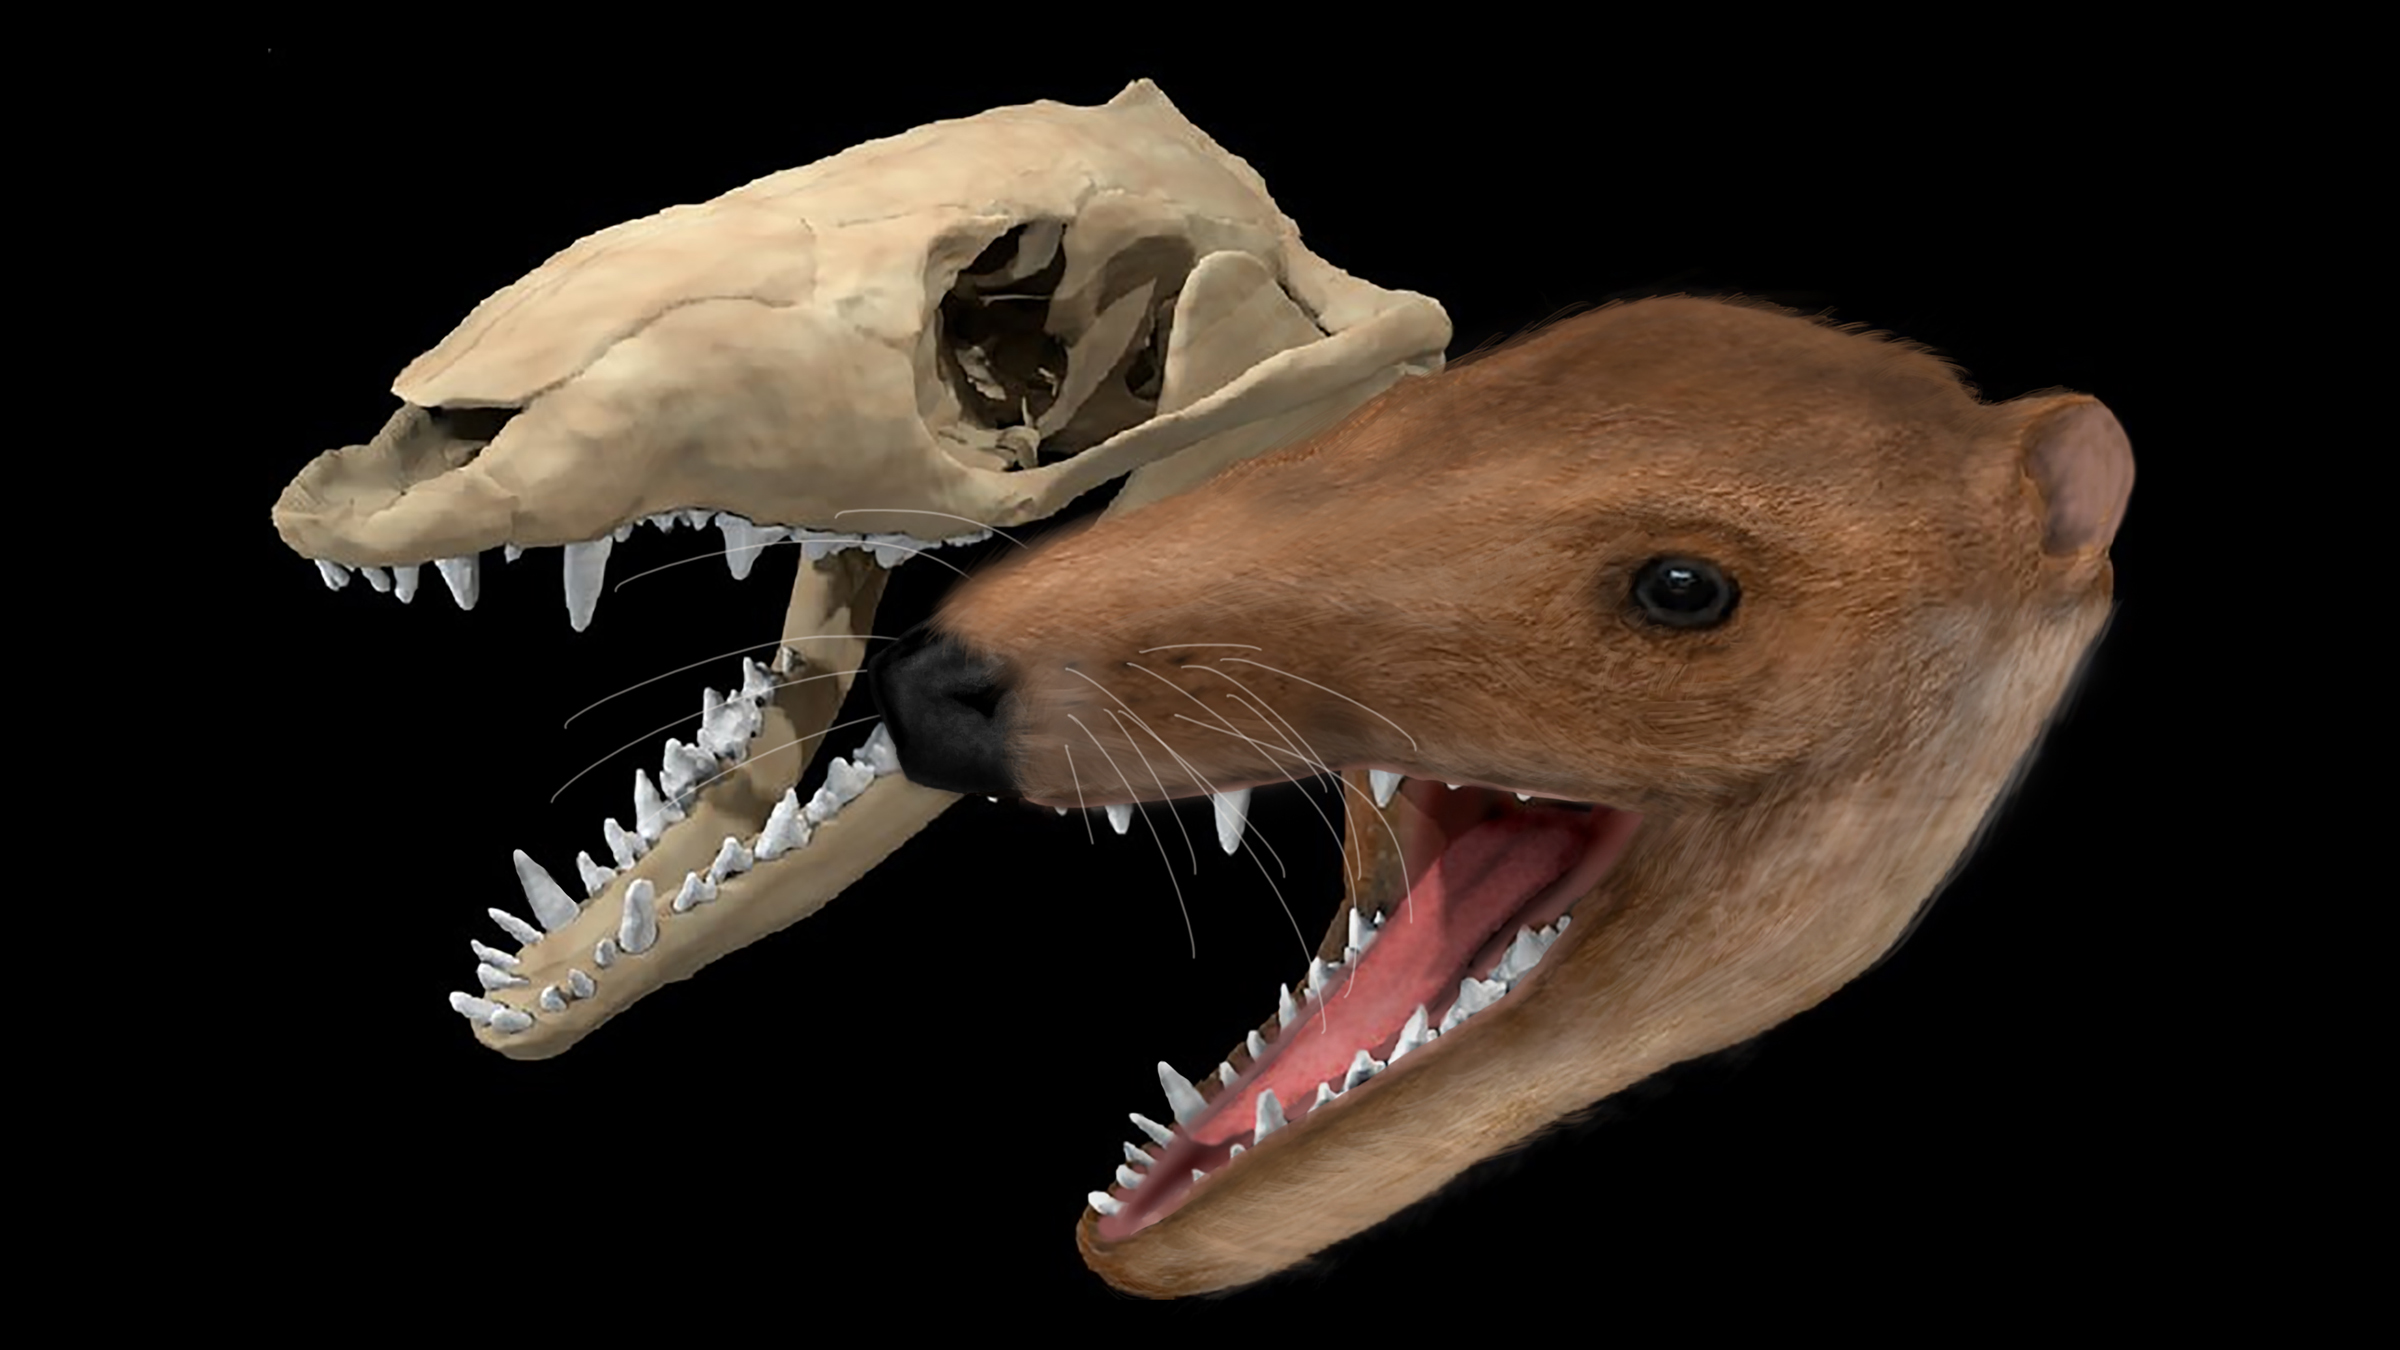 An image of the skull and an illustration of Morganucodon, one of the first mammals.